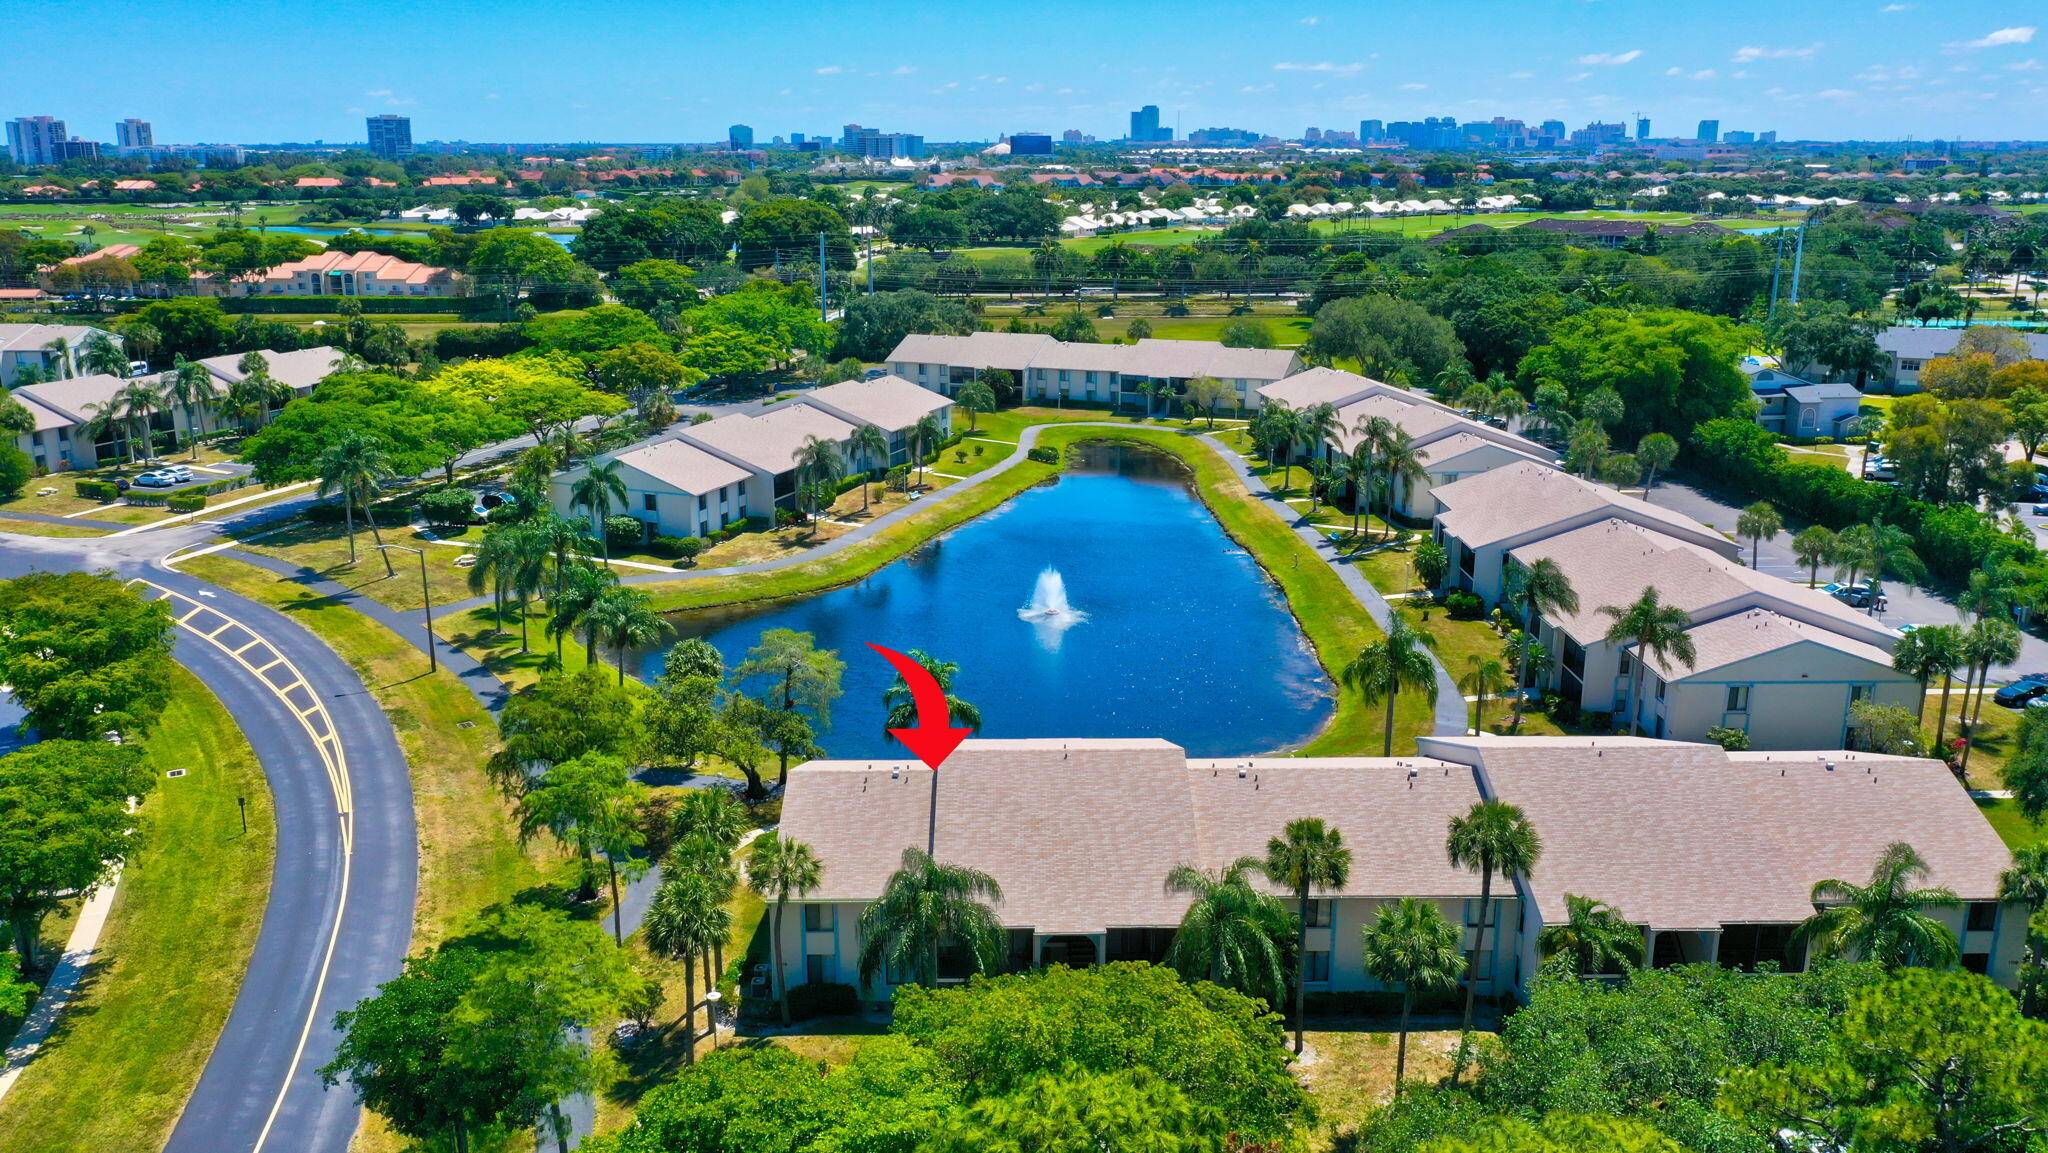 Stunning Lake Views Await in This 2BR 2BA Condo at Palm Club VillageIndulge in the tranquil beauty of lakeside living with this exceptional 2 bedroom, 2 bathroom condo boasting breathtaking ...